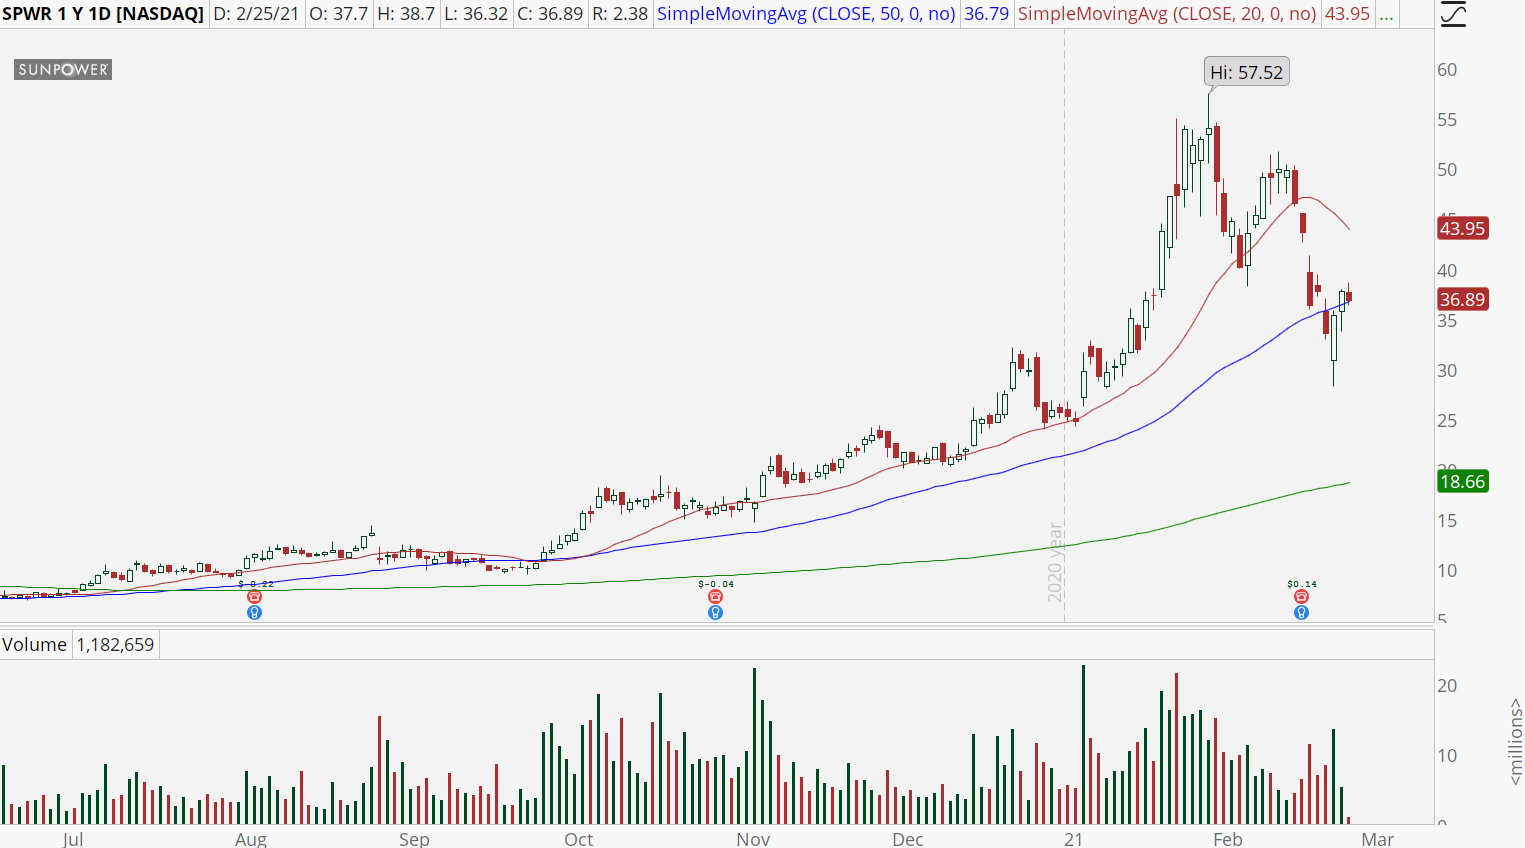 SunPower (SPWR) stock with daily downtrend